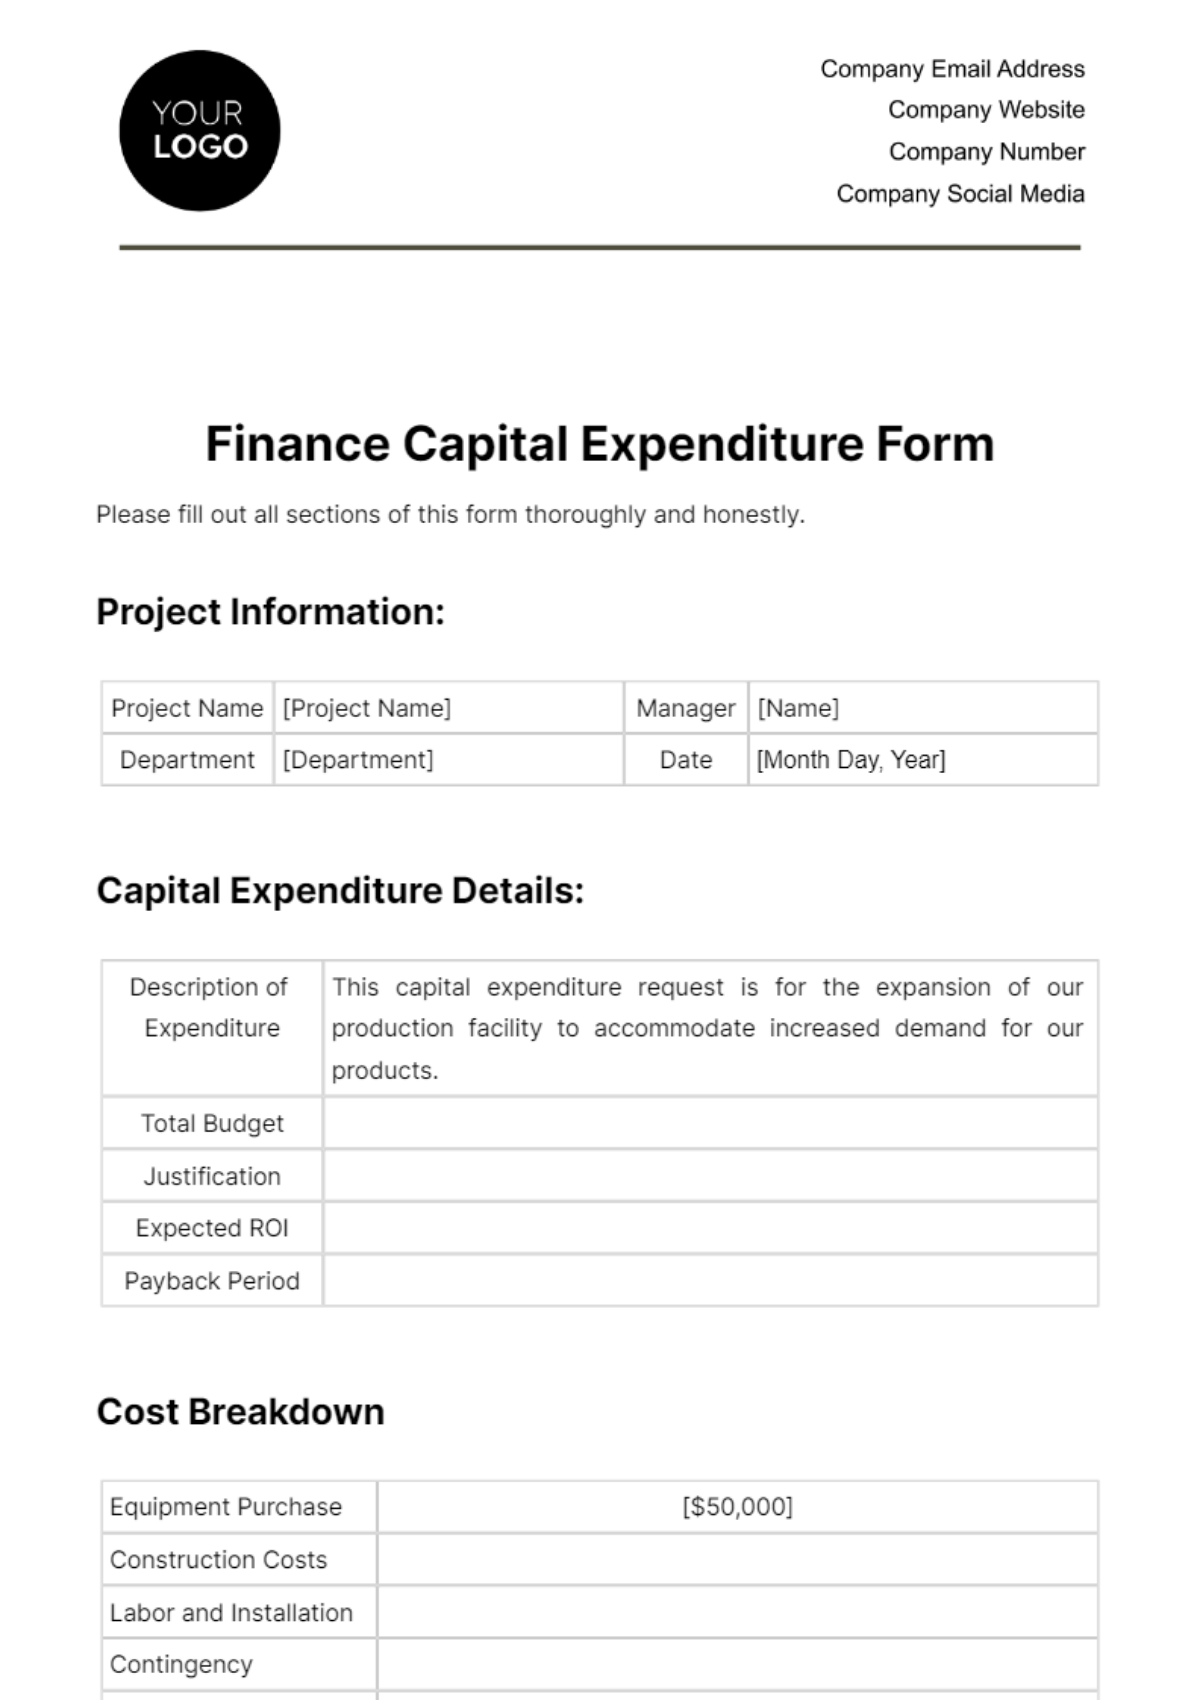 Finance Capital Expenditure Form Template